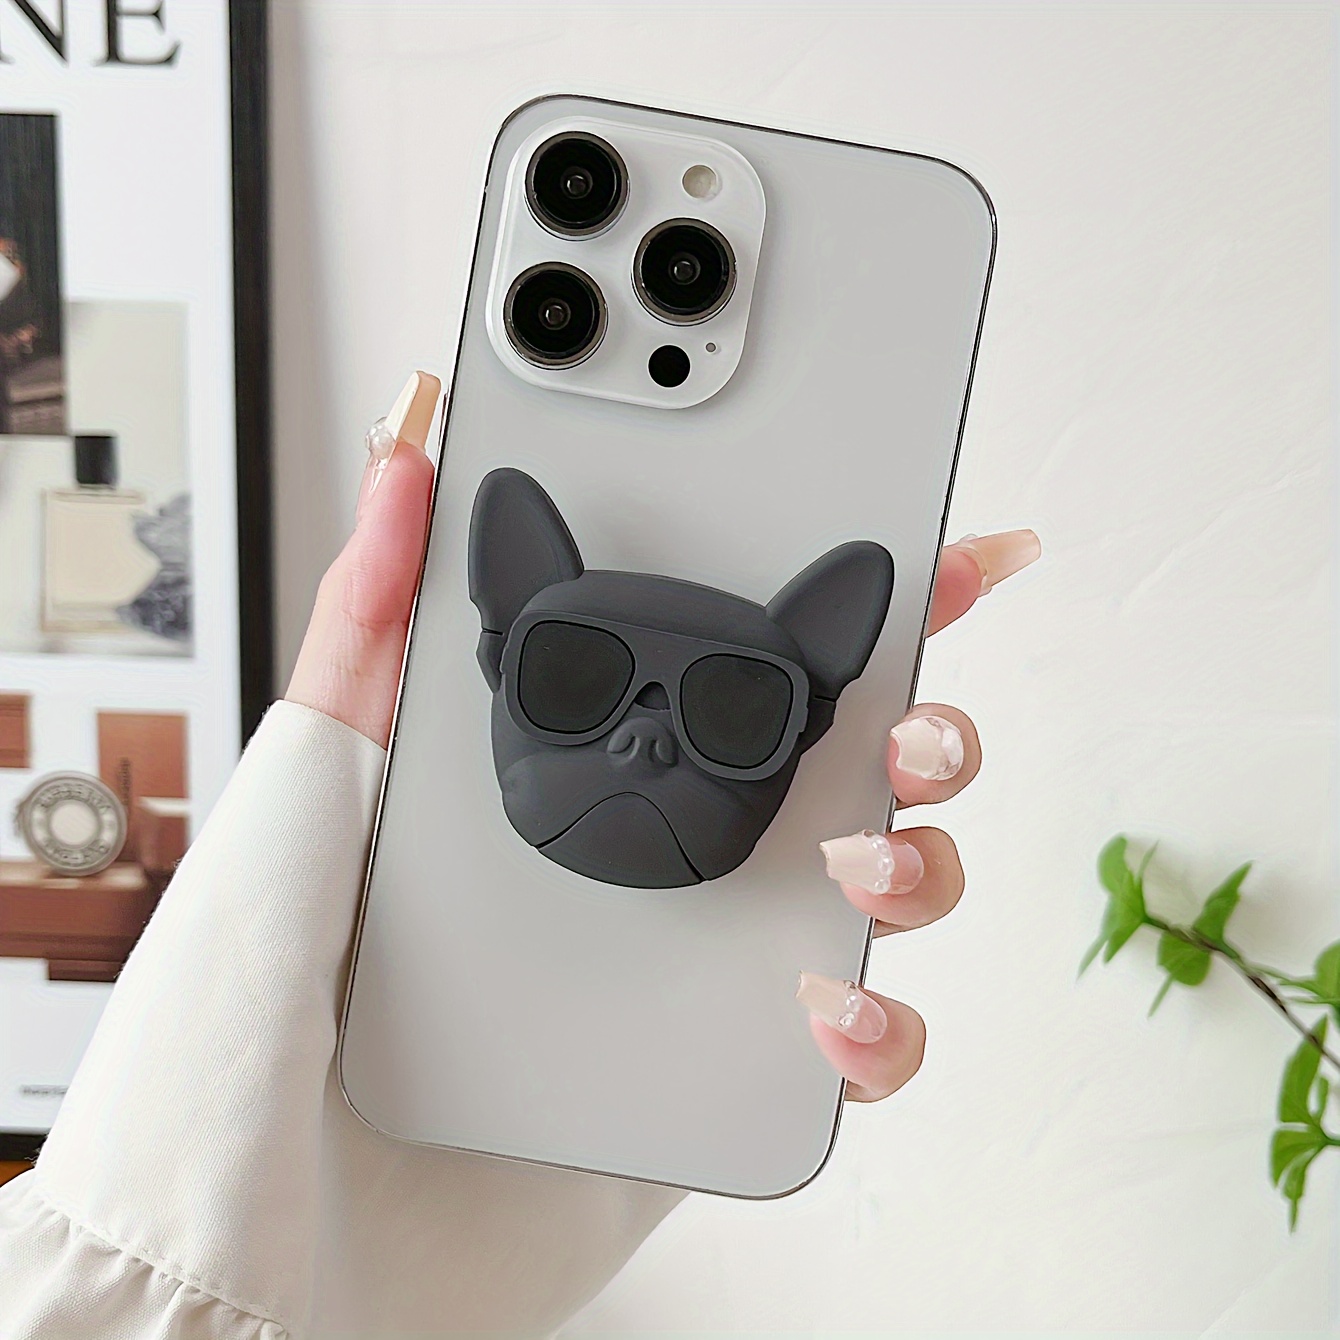 

Foldable Holder For Cool Dog Phone Case - Easy To Use And Install, Adjustable Angle, Practical, Stylish And Durable, Suitable For Any Phone Model, Compact And Portable.